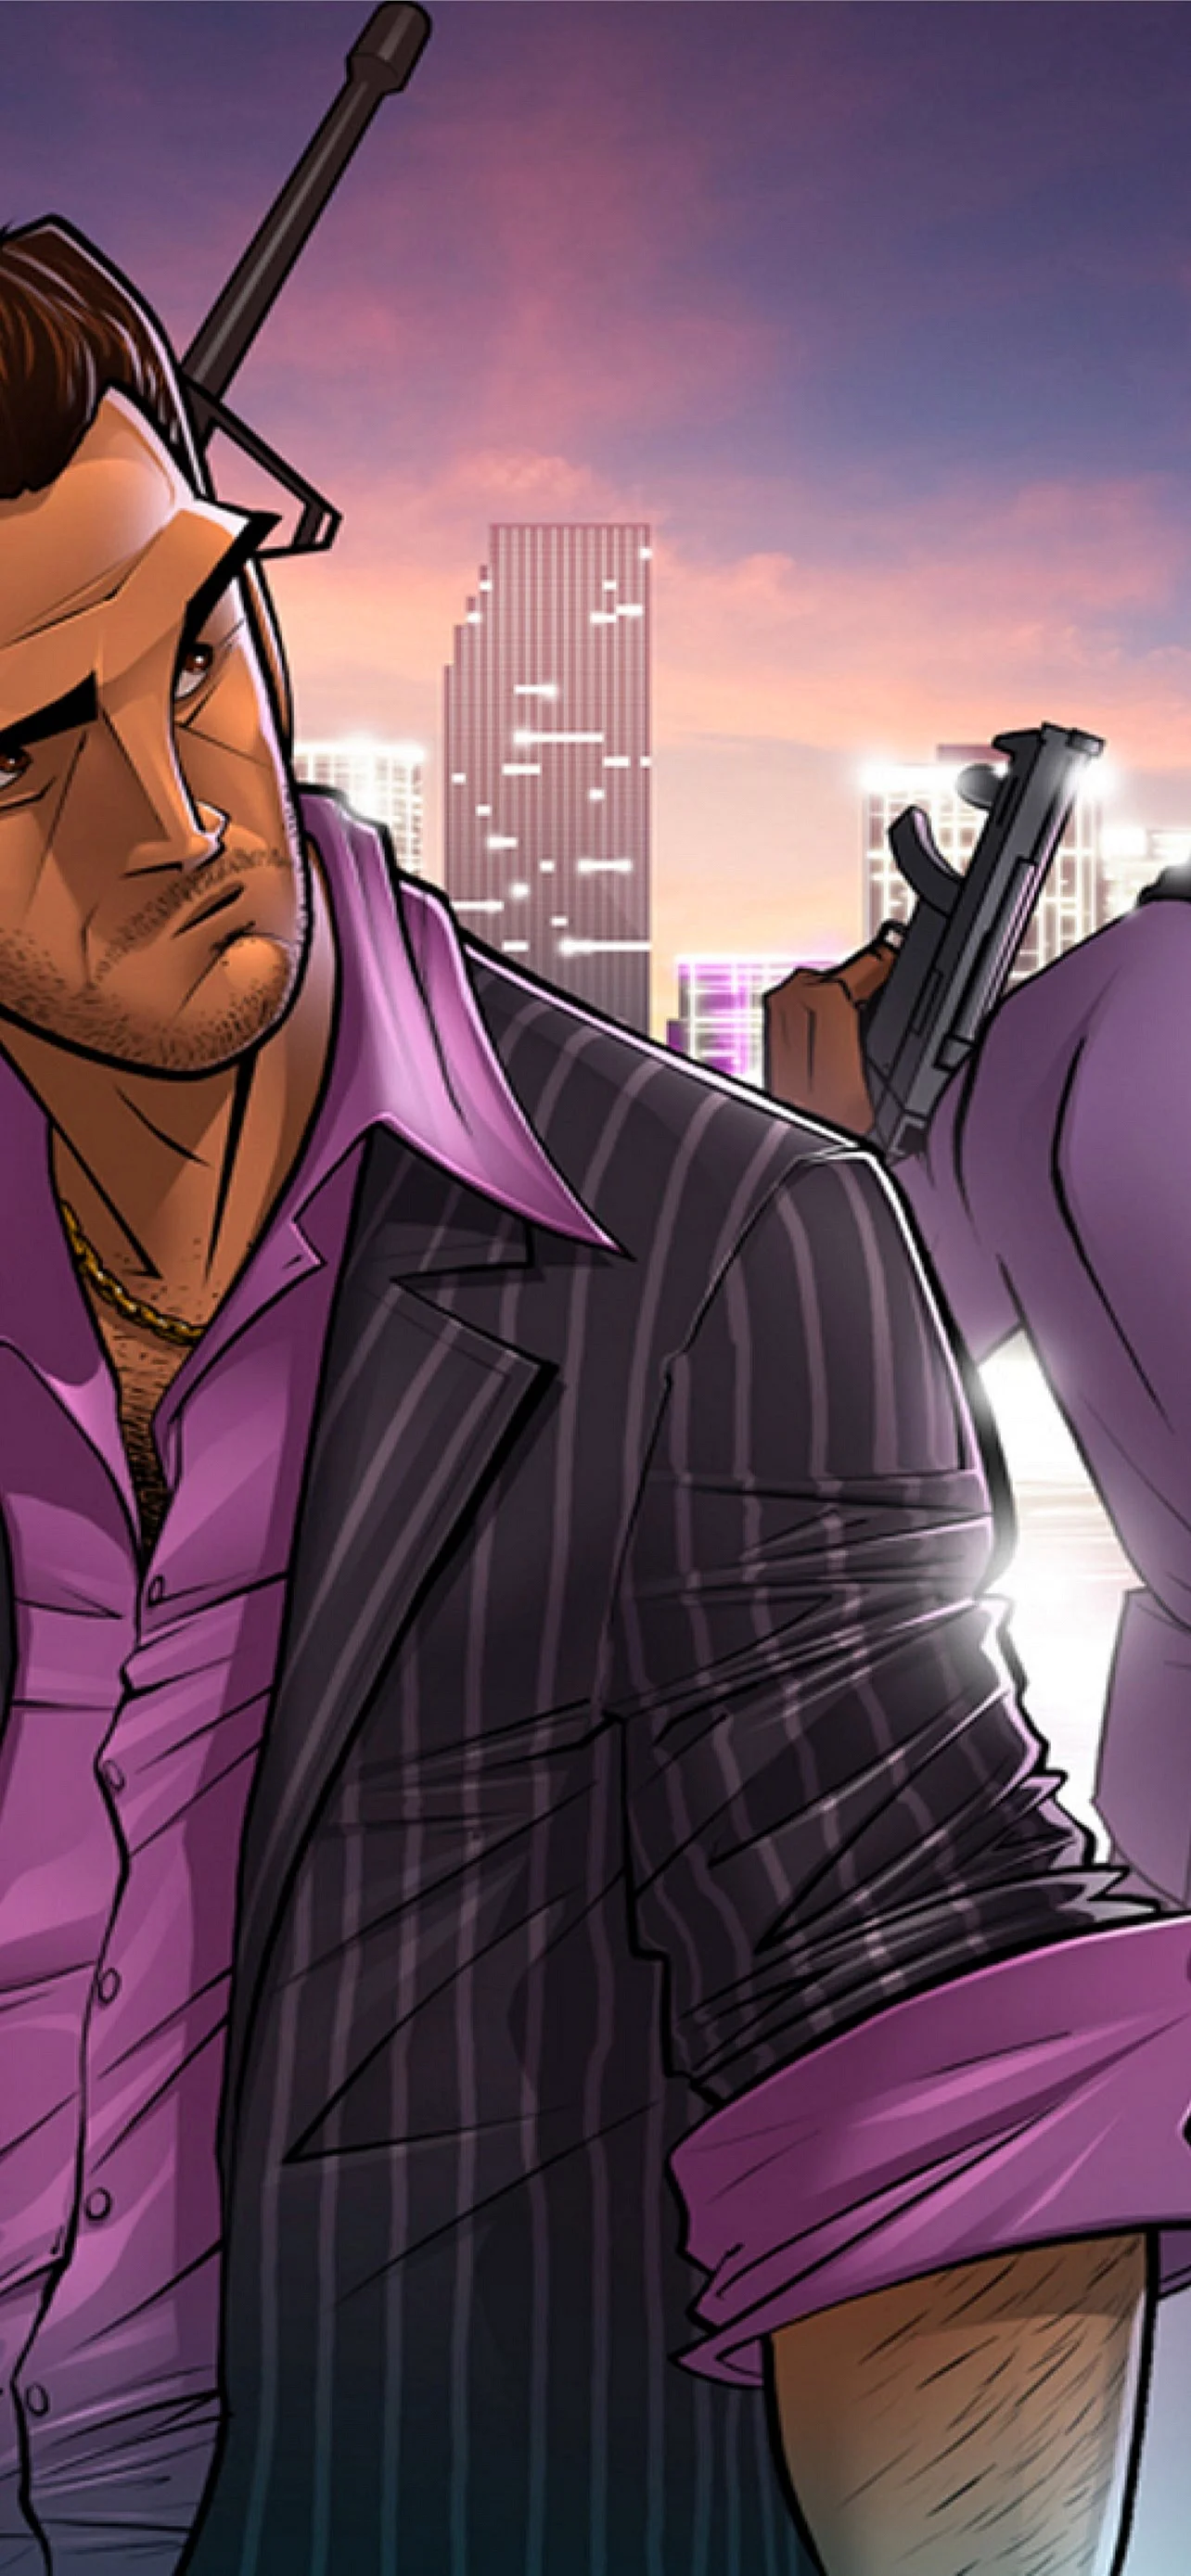 Tommy Vercetti Wallpaper for iPhone 12 Pro Max